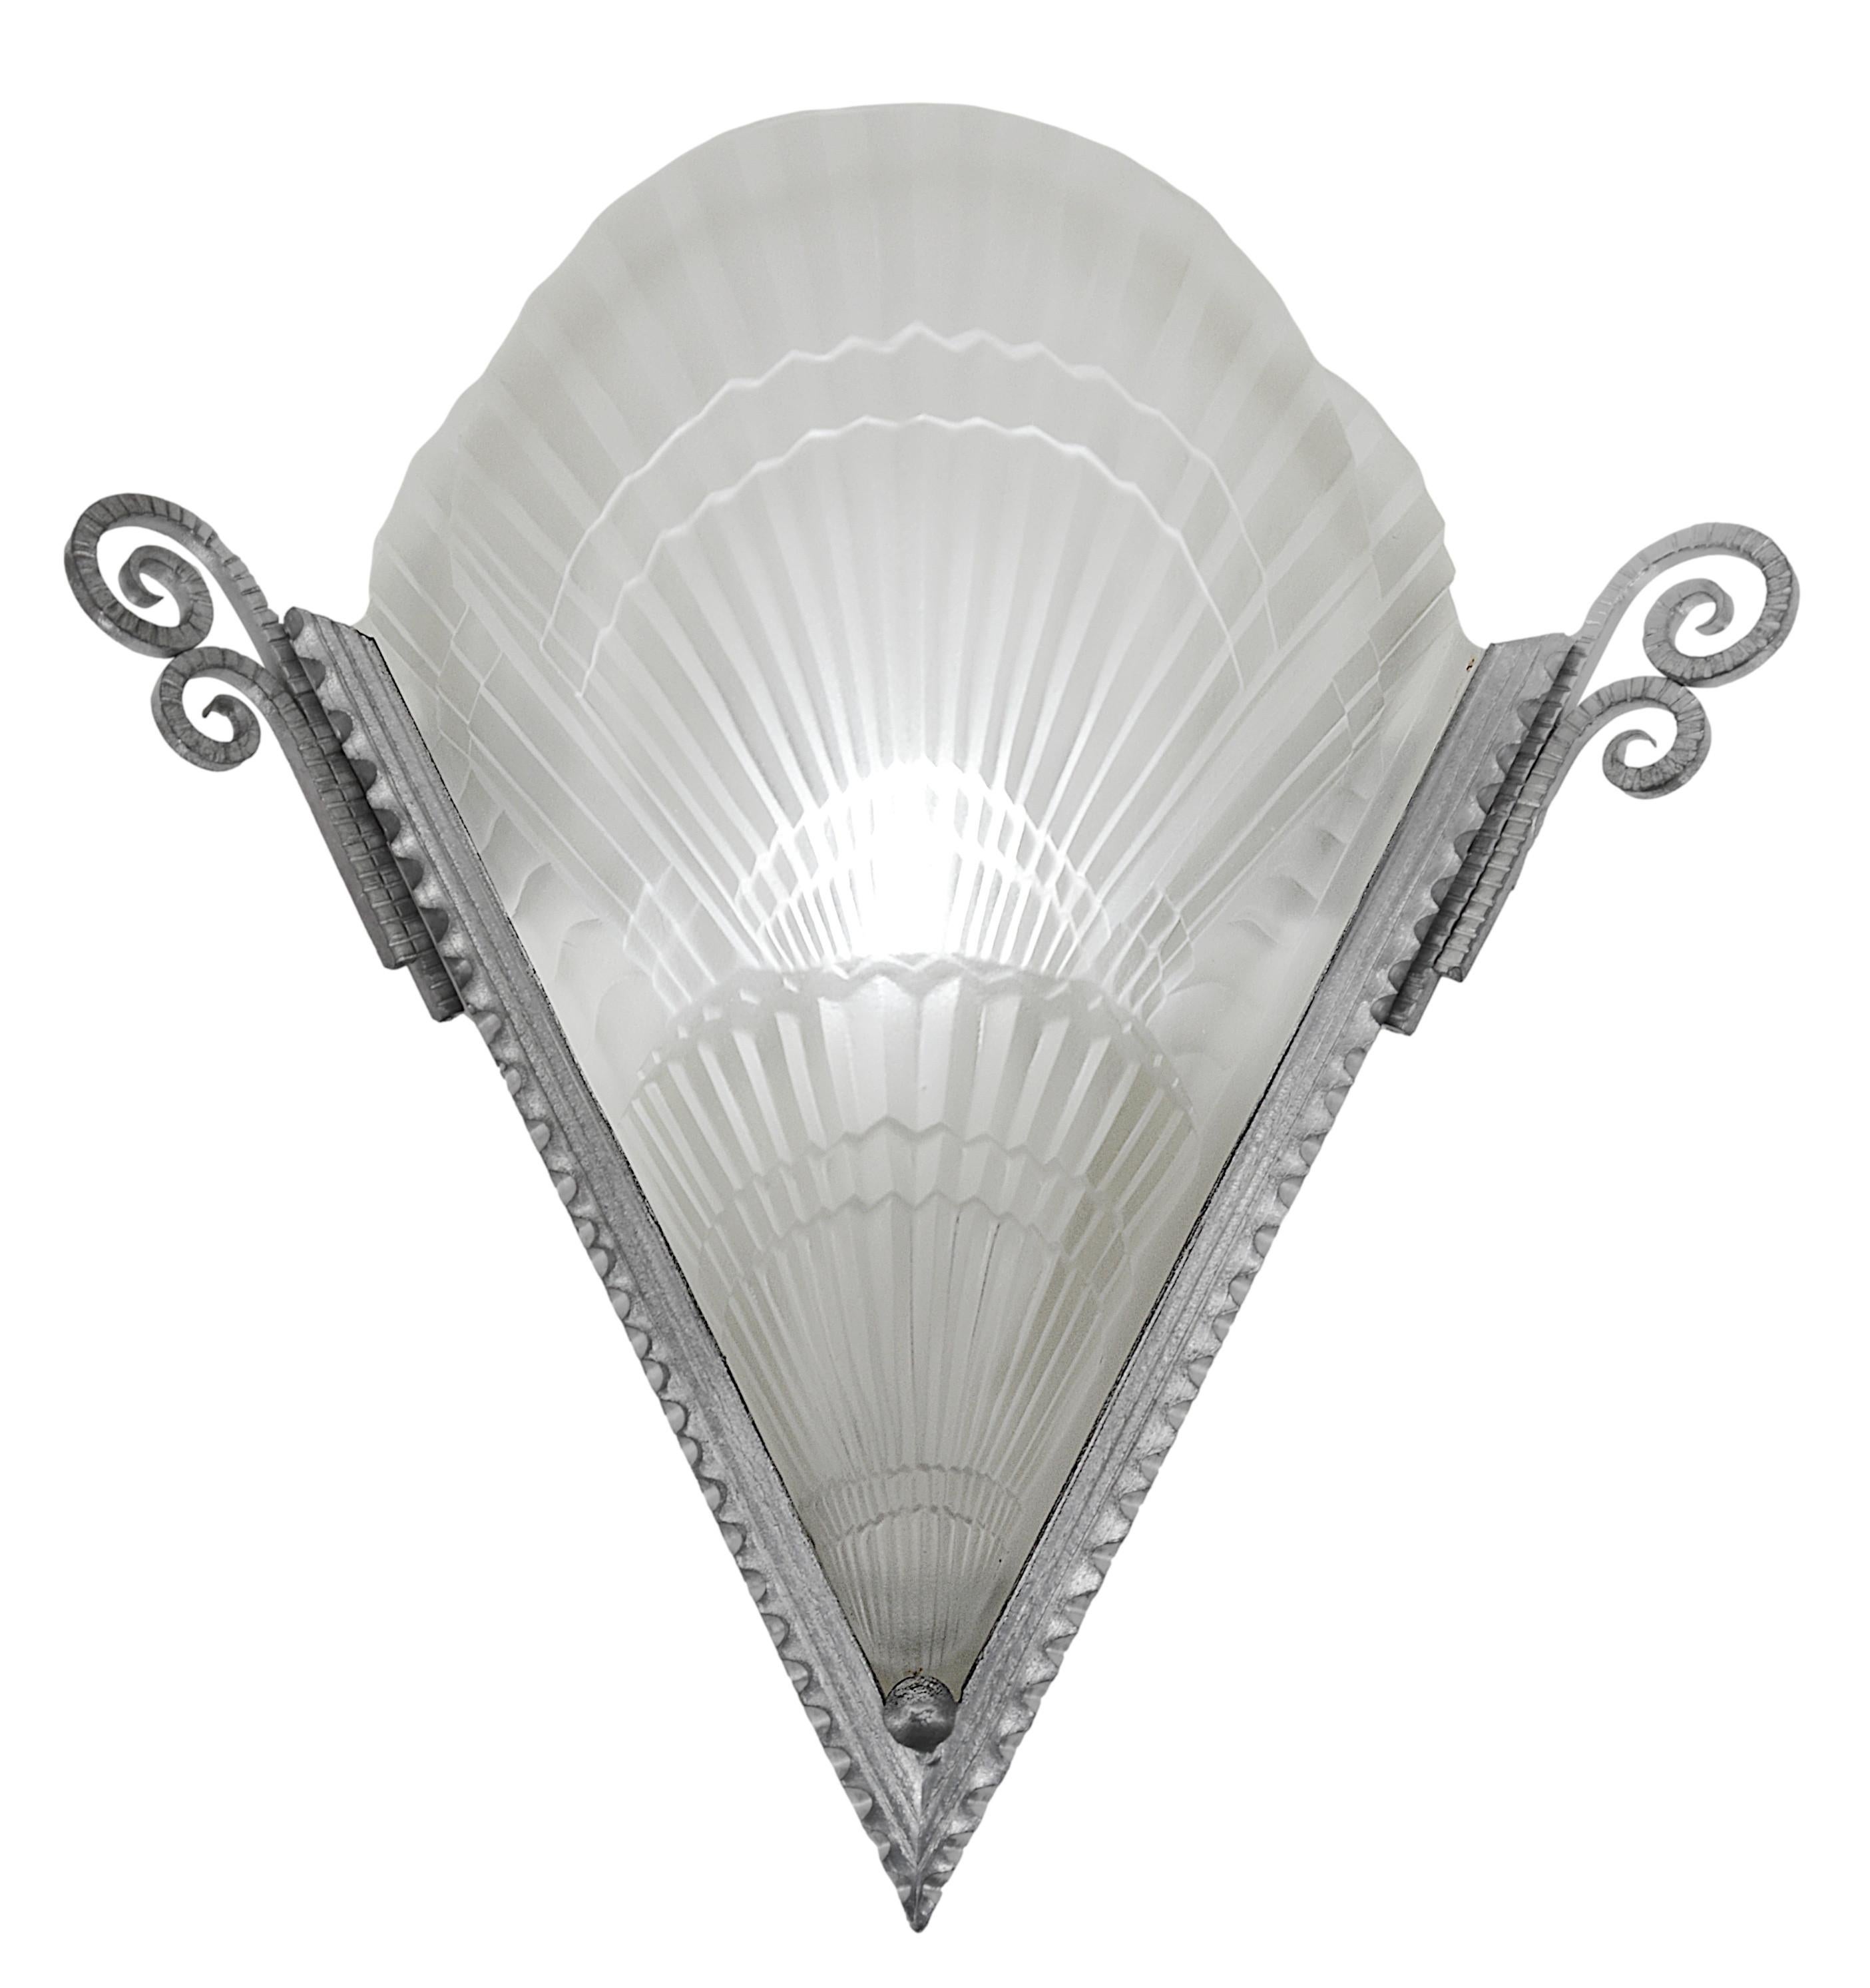 Large French Art Deco pair of wall sconces by Noverdy (Dijon), France, ca.1925. Thick molded glass shades and their wrought-iron fixtures. Scallop shell decor. Each - Height : 12.6